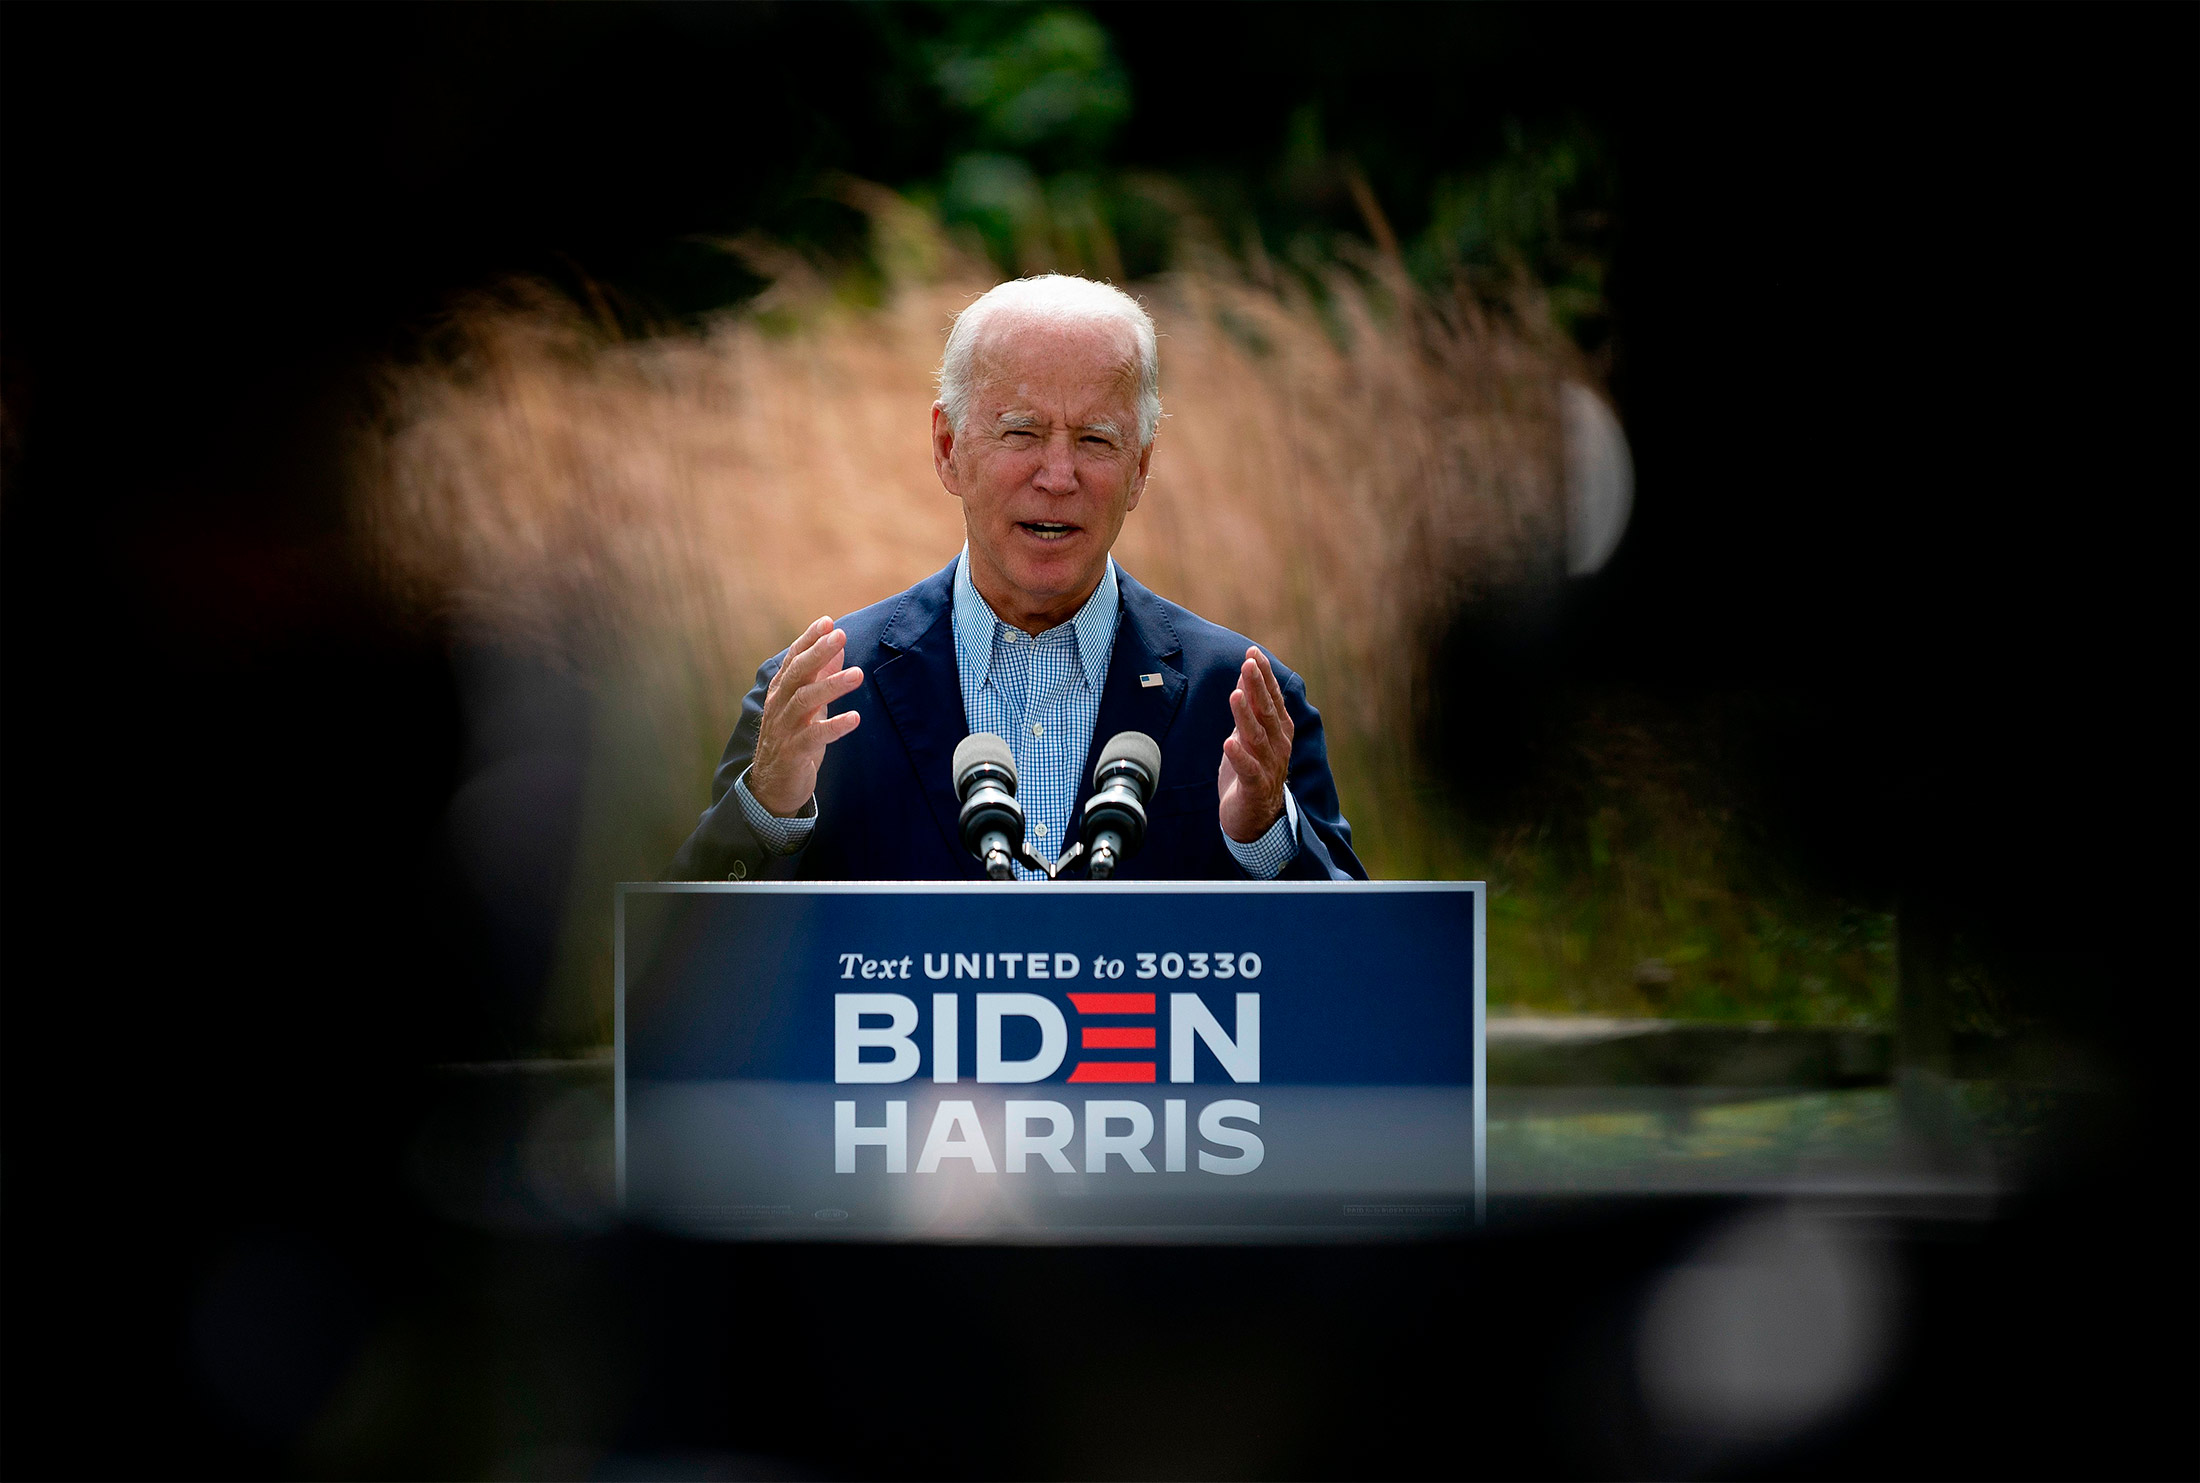 Biden has called for banning fracking on federal lands, but has said he does not support a nationwide ban on the technique.